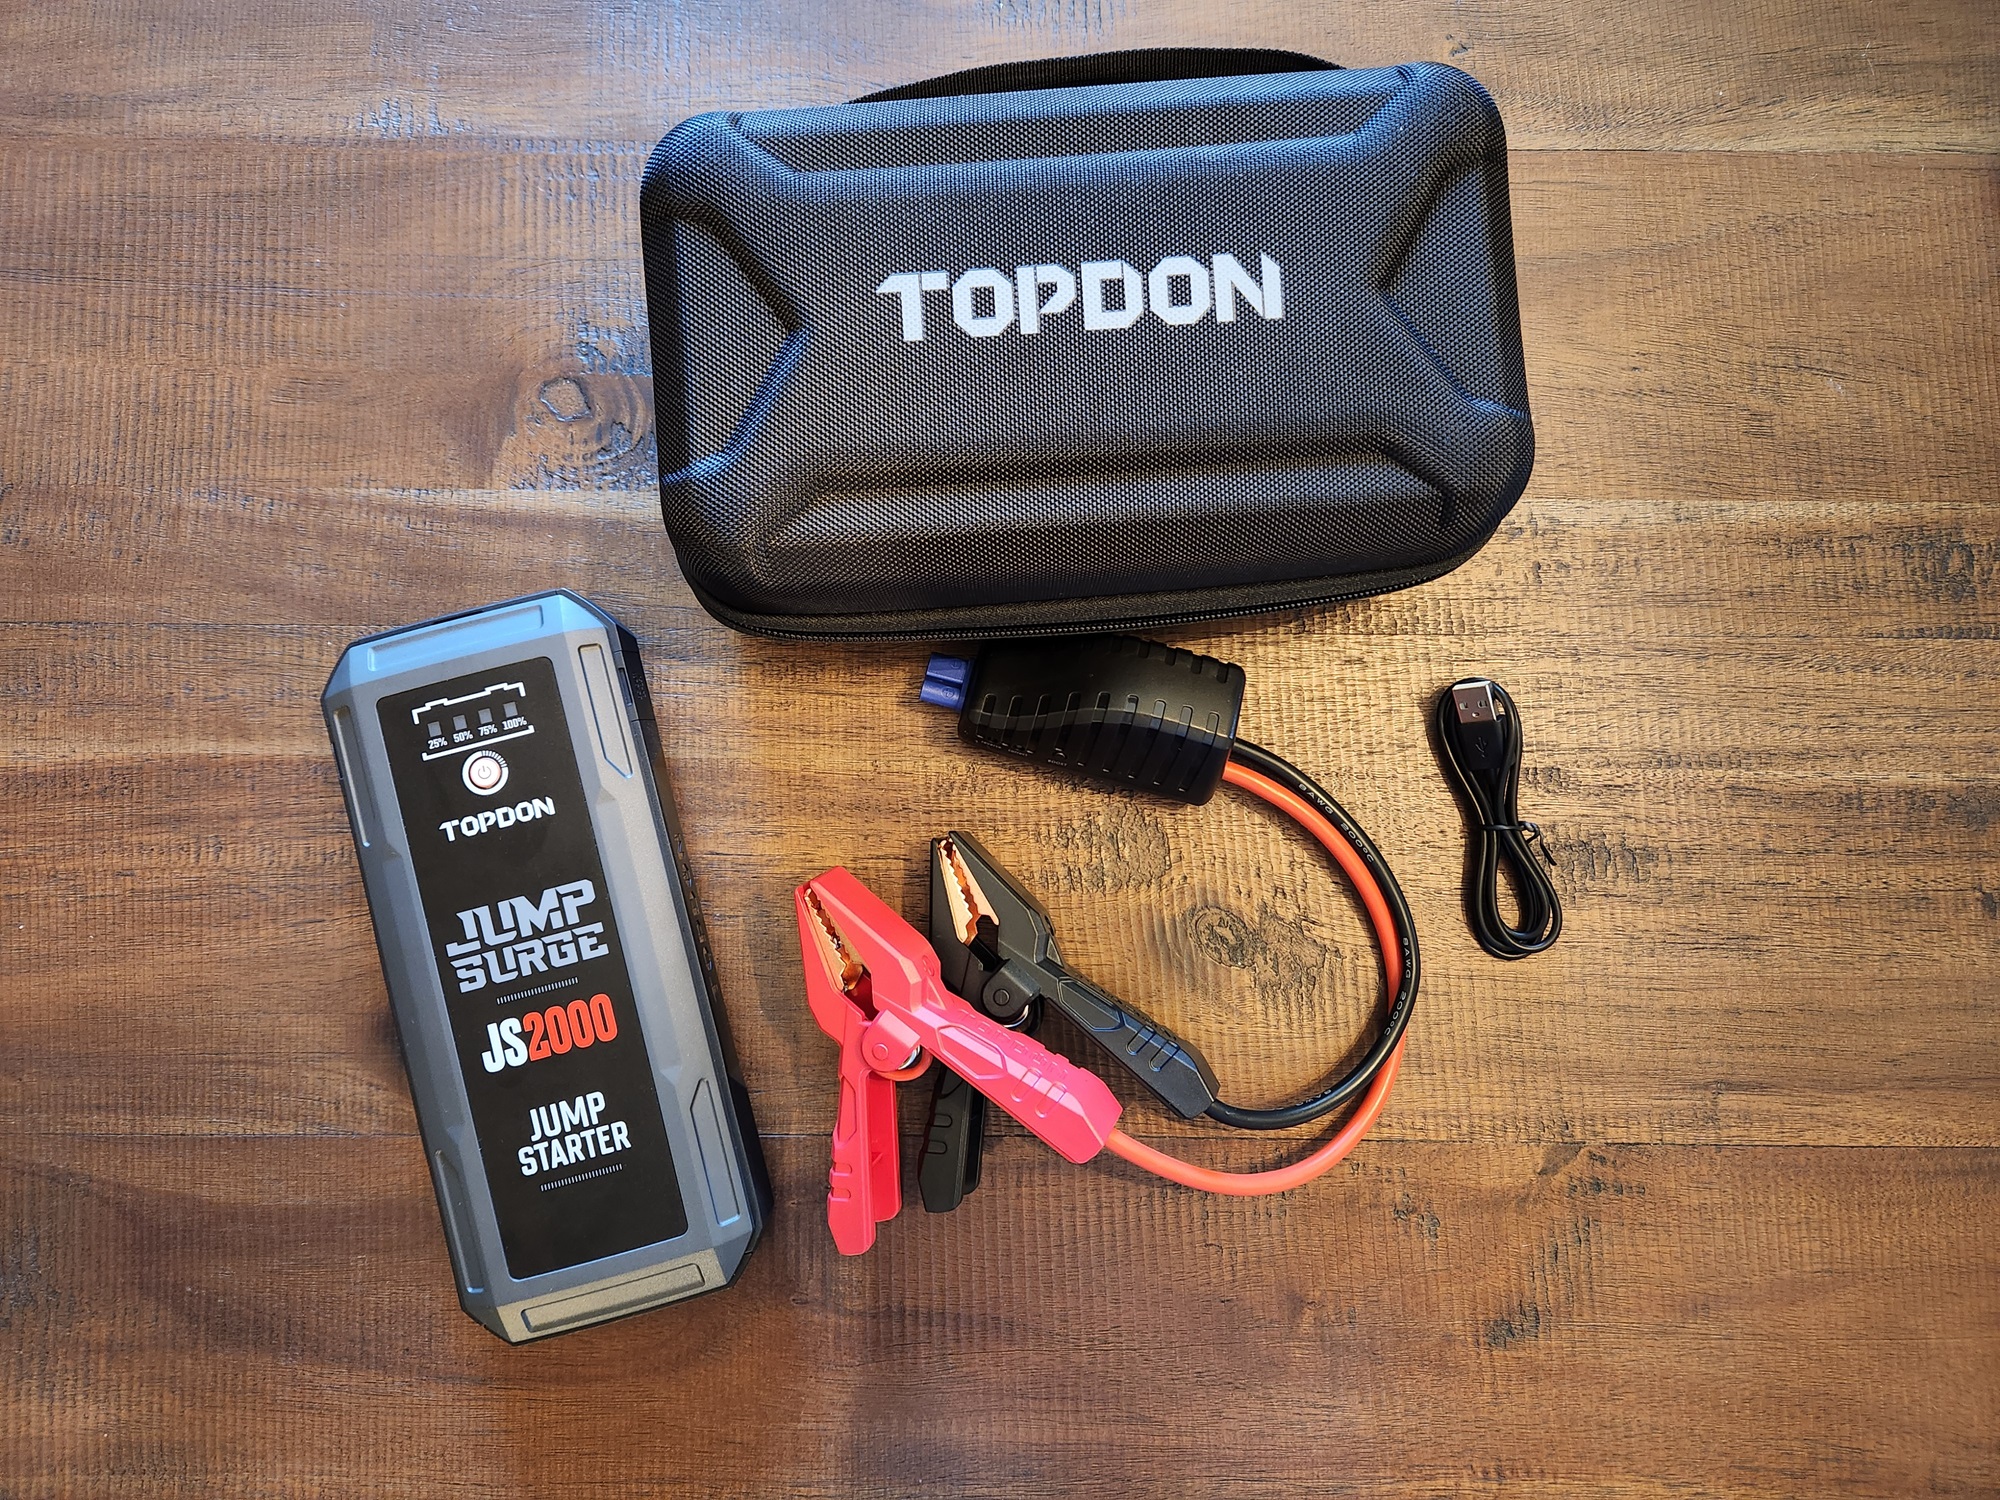 Let's Jump Start into the Topdon Jump Surge 2000 Overview - Qwerty Articles